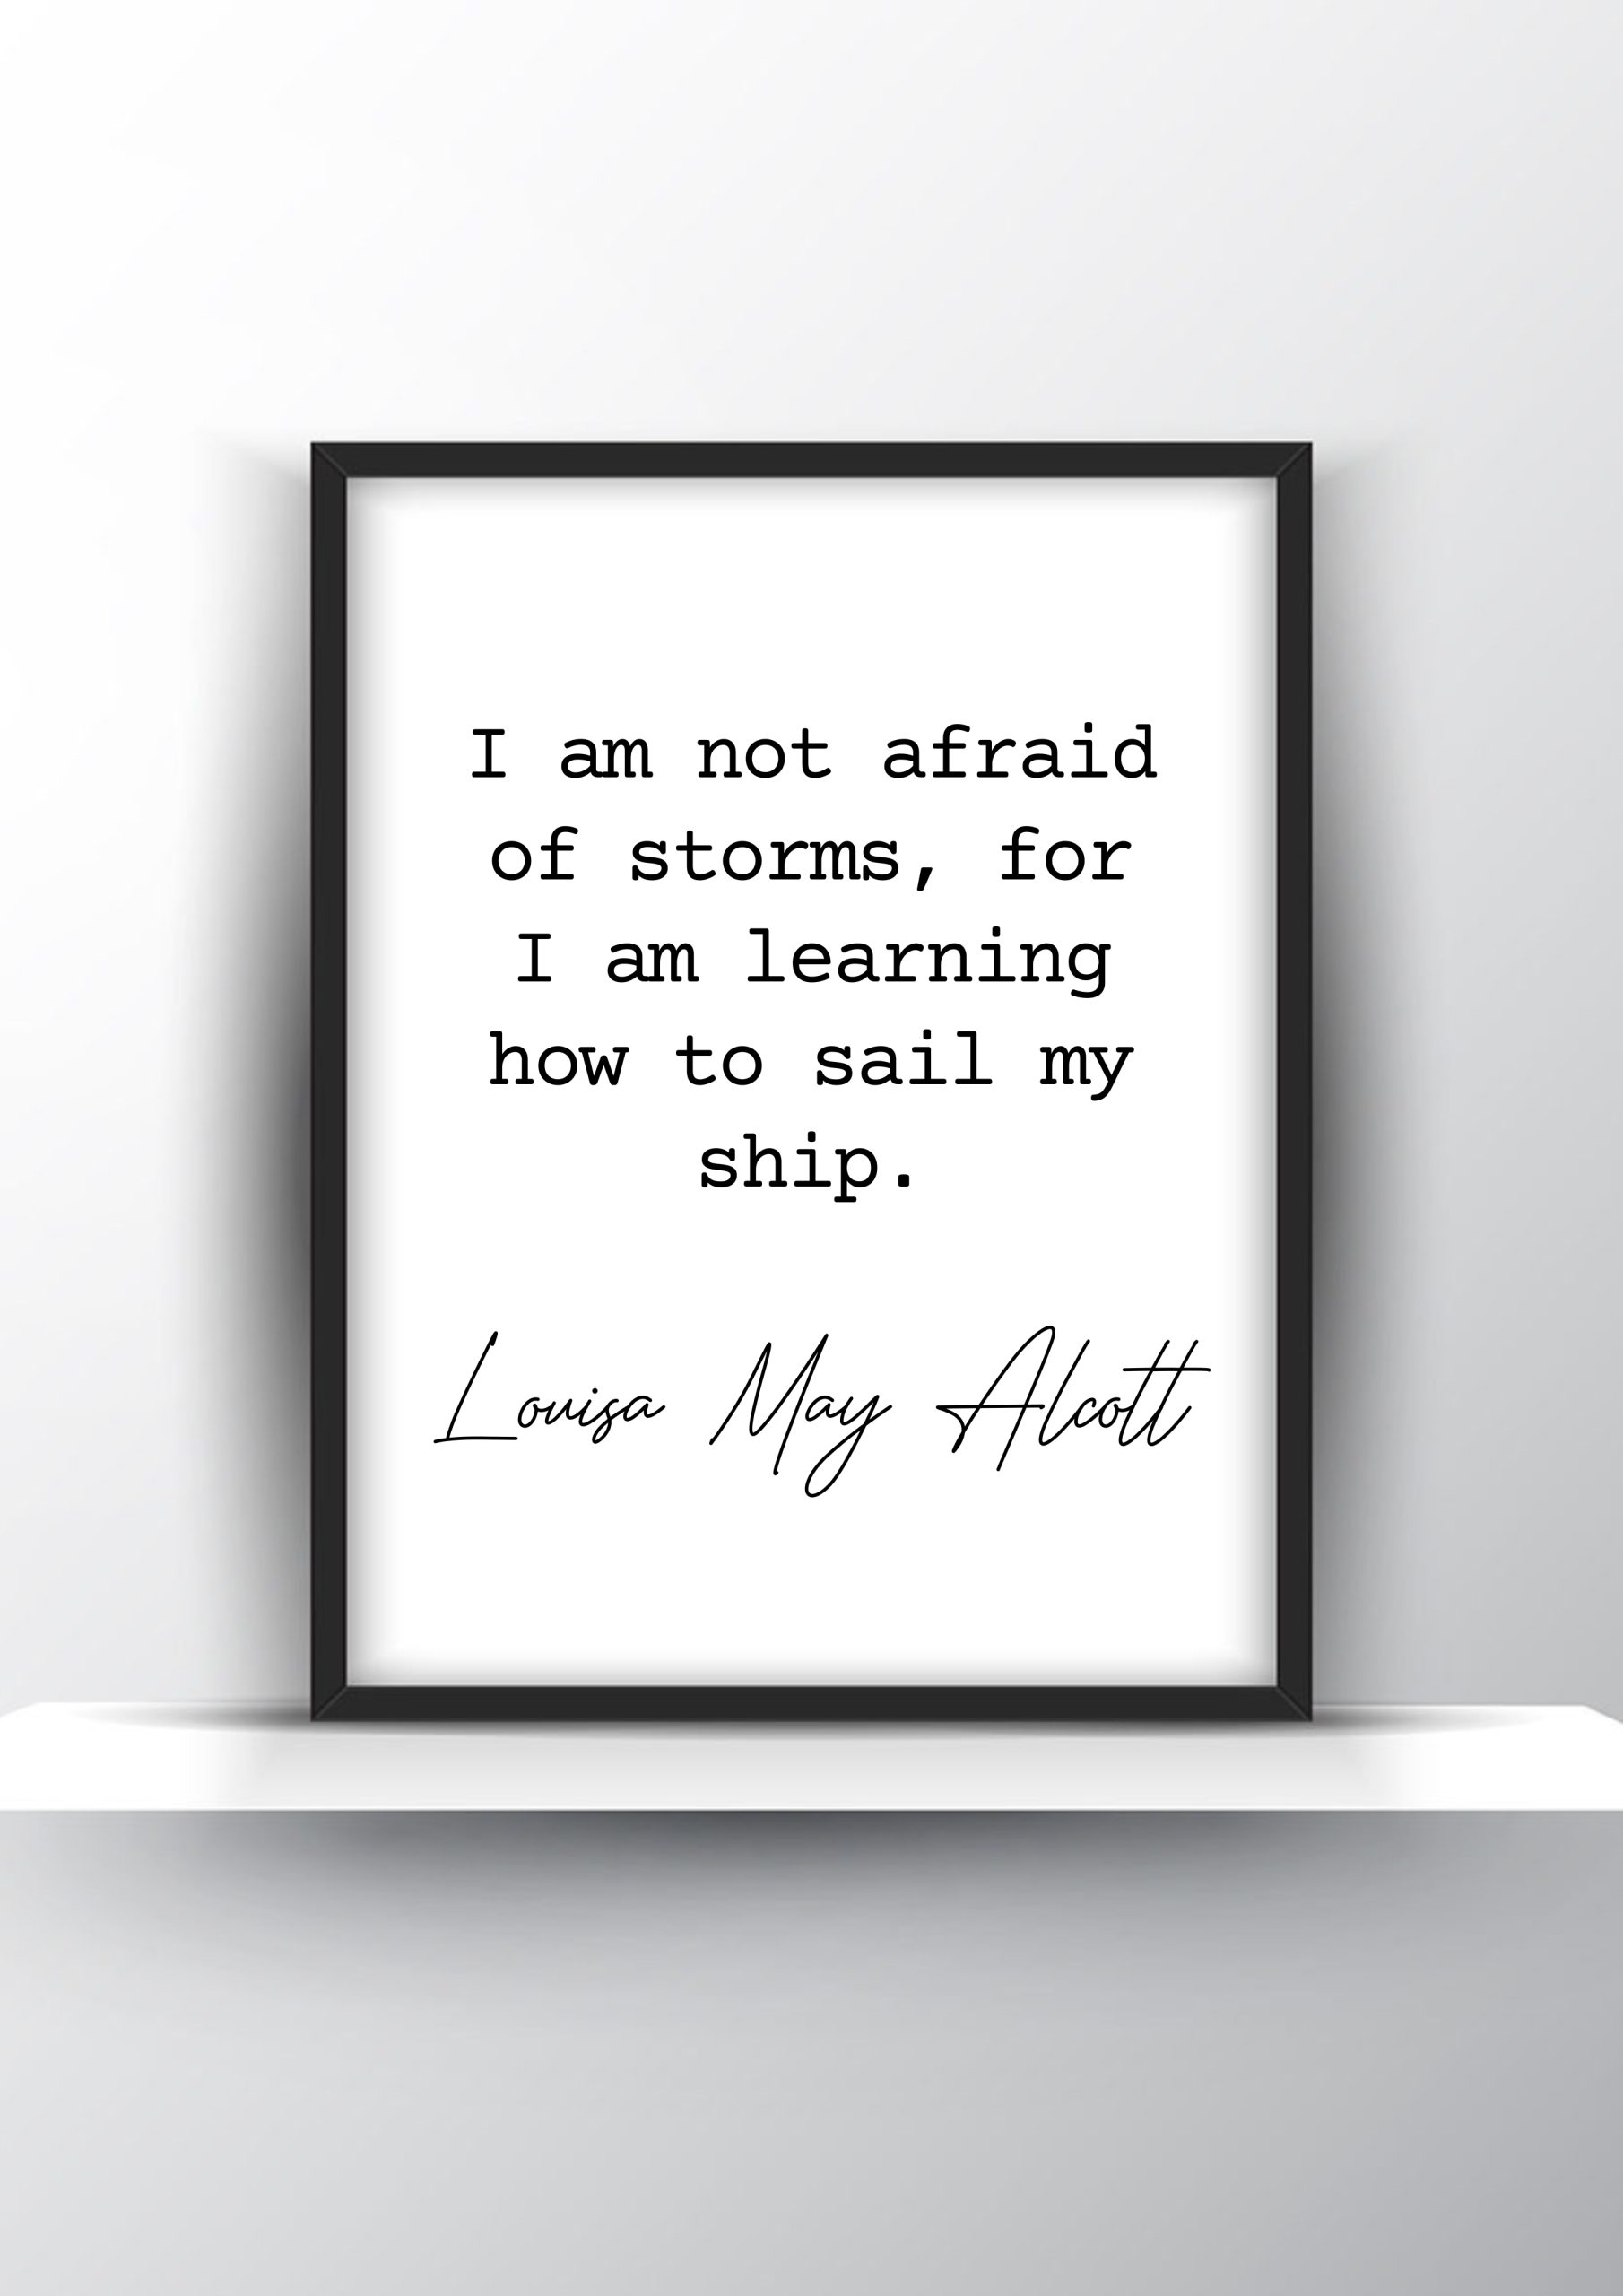 I Am Not Afraid Of Storms For I Am Learning How To Sail My Ship by Louisa May Alcott Printable Wall Art